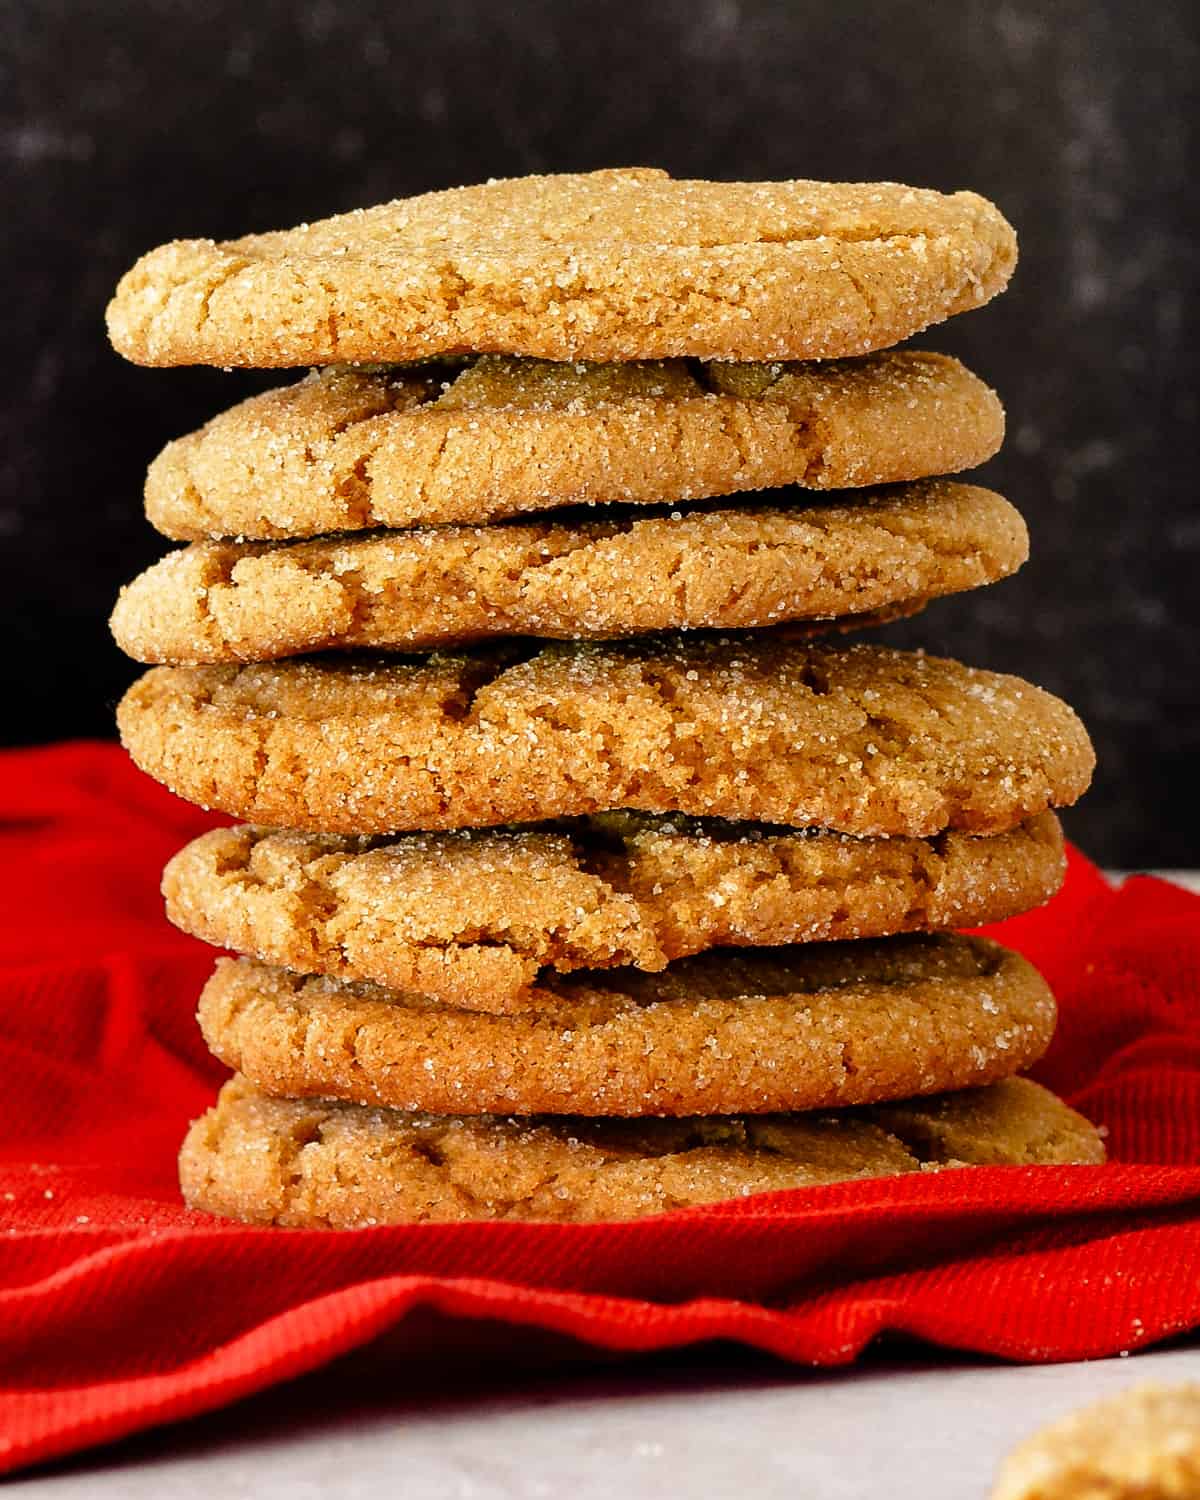 Stack of cookies on red fabric.